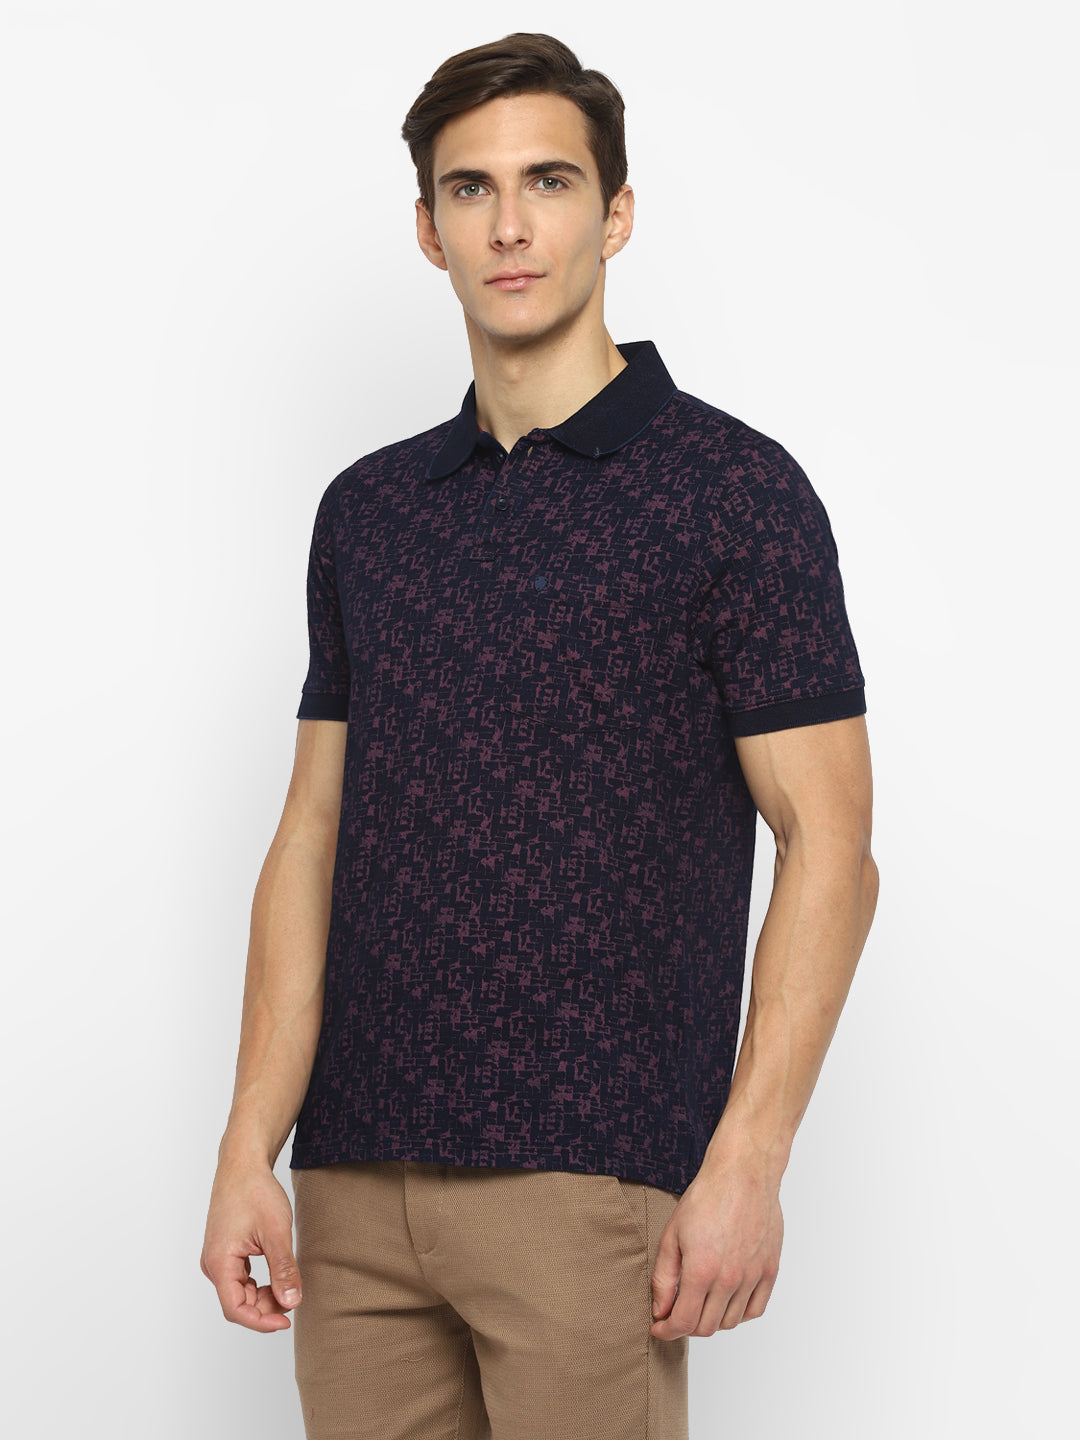 100% Cotton Navy Blue Printed Polo Neck Half Sleeve Casual T-Shirt